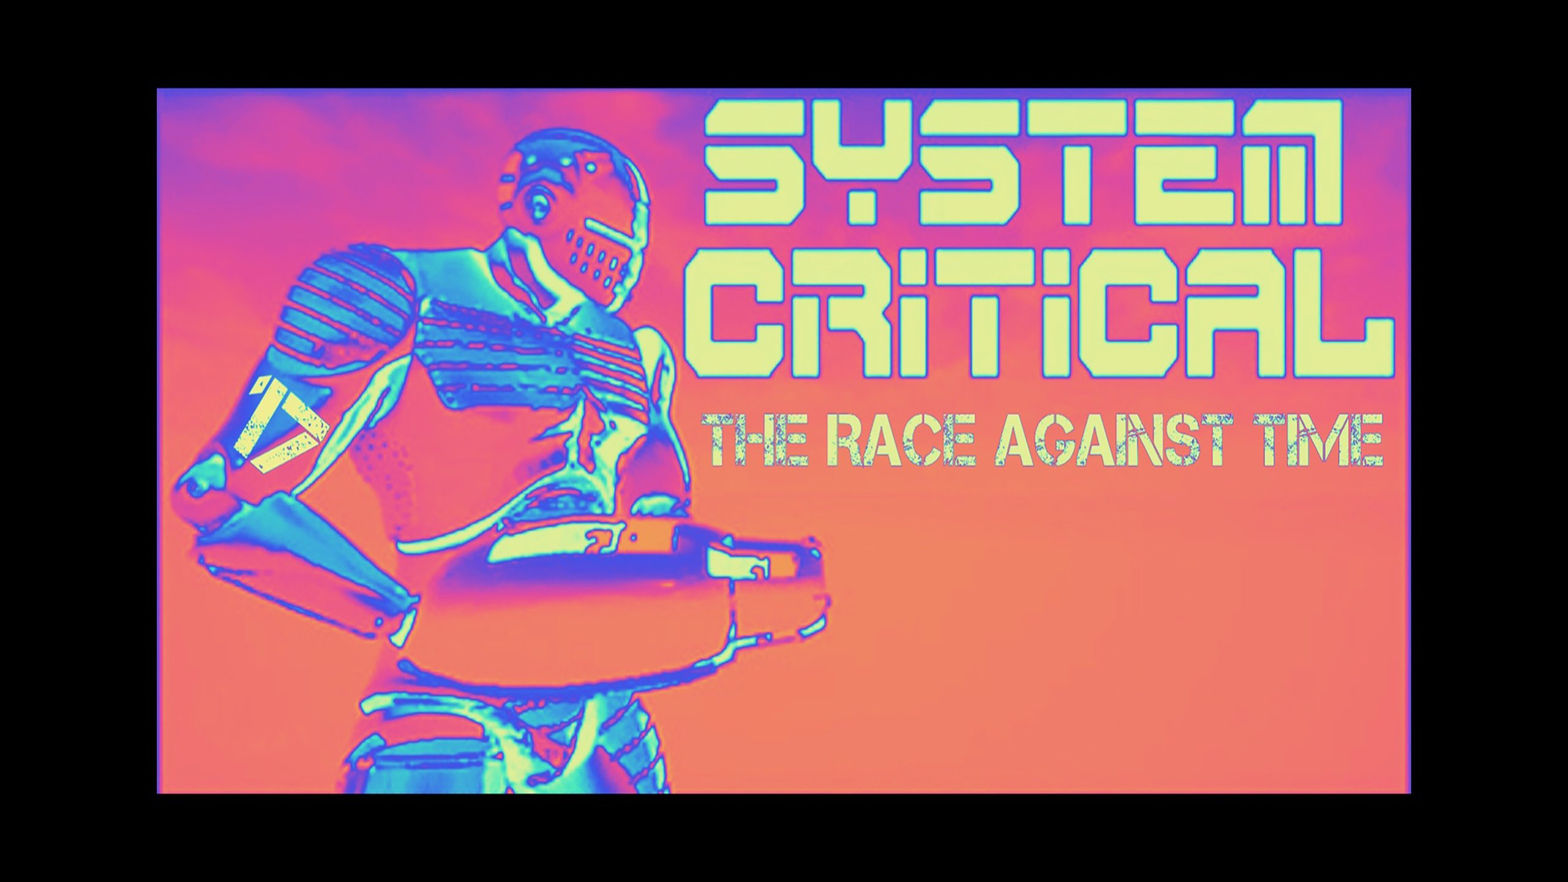 System Critical: The Race Against Time